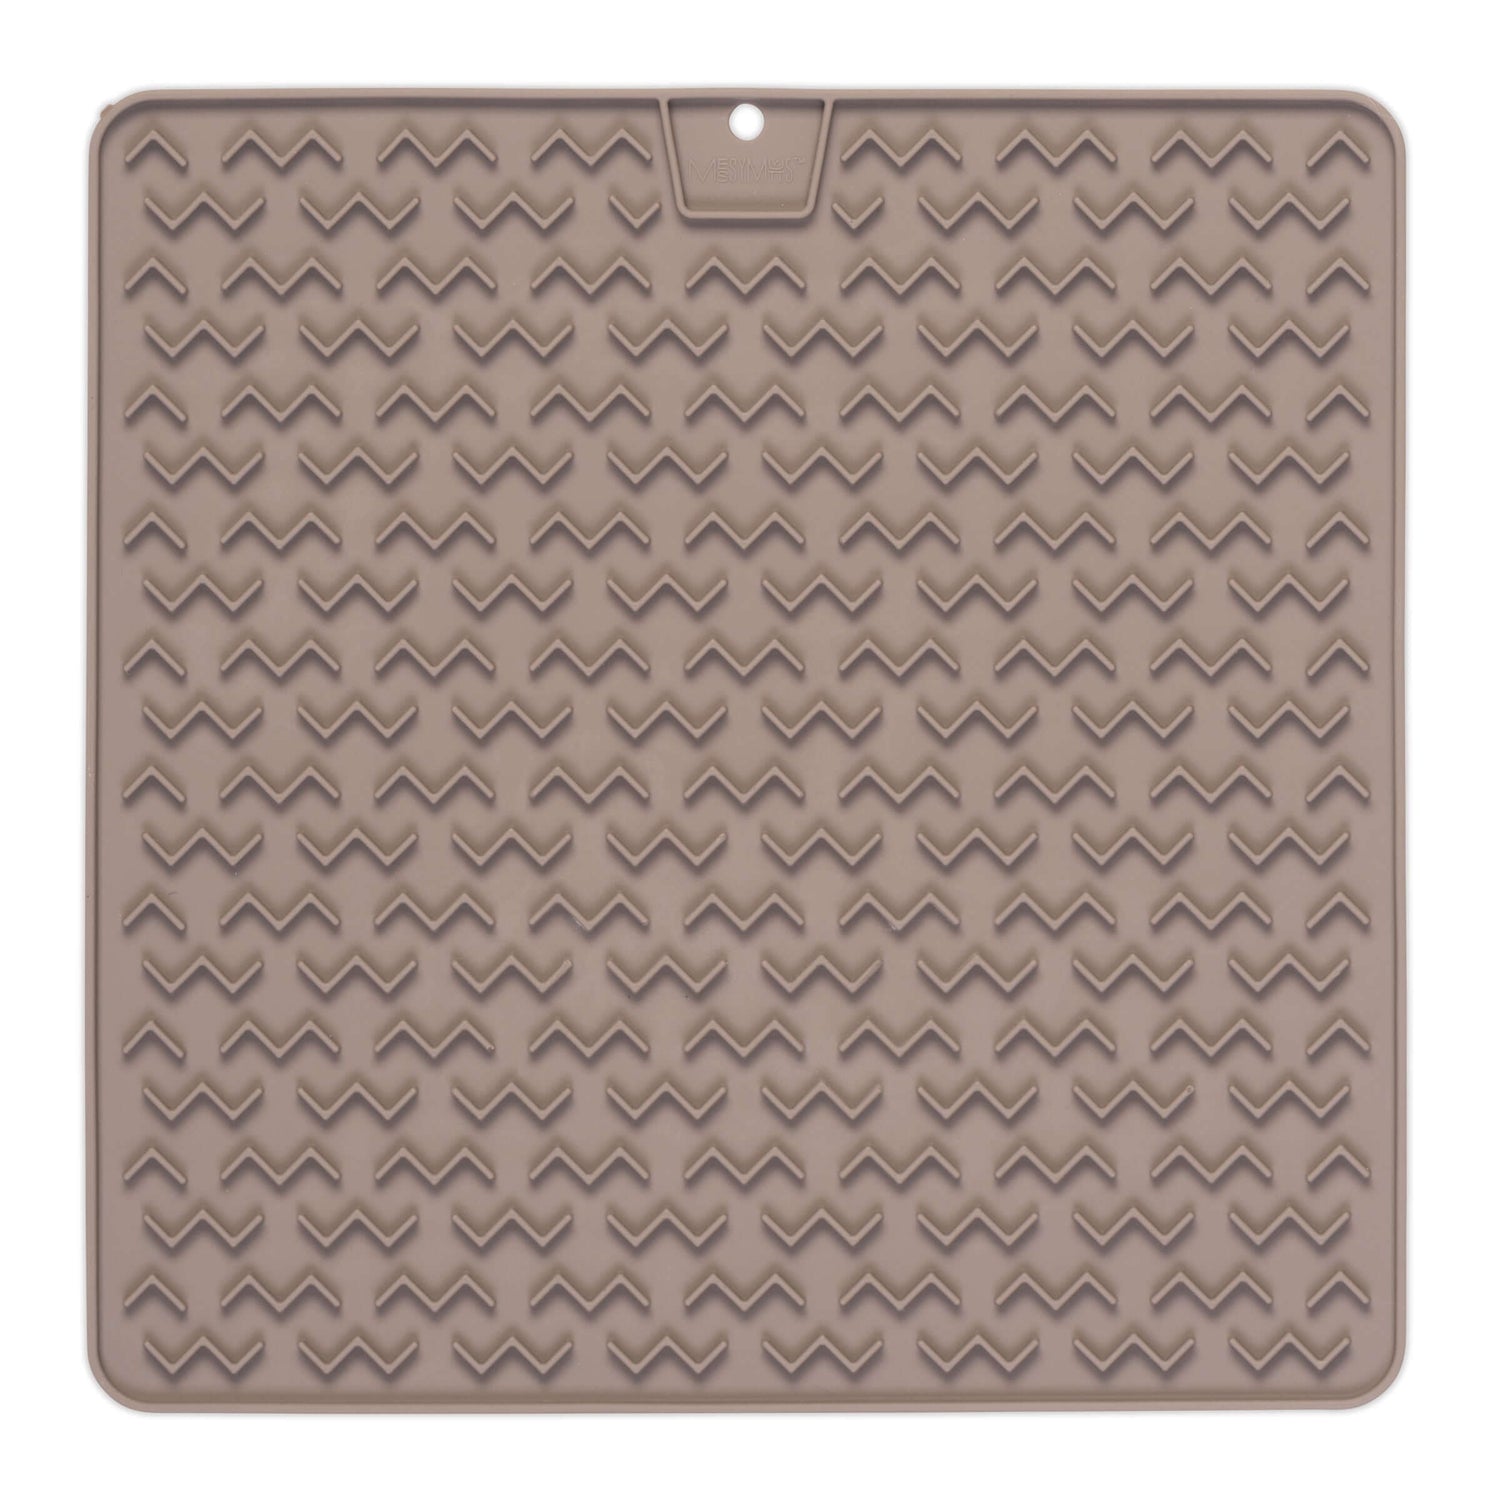 Extra large dog lick mat.  12 inch diameter.  Non slip design for large dogs. 